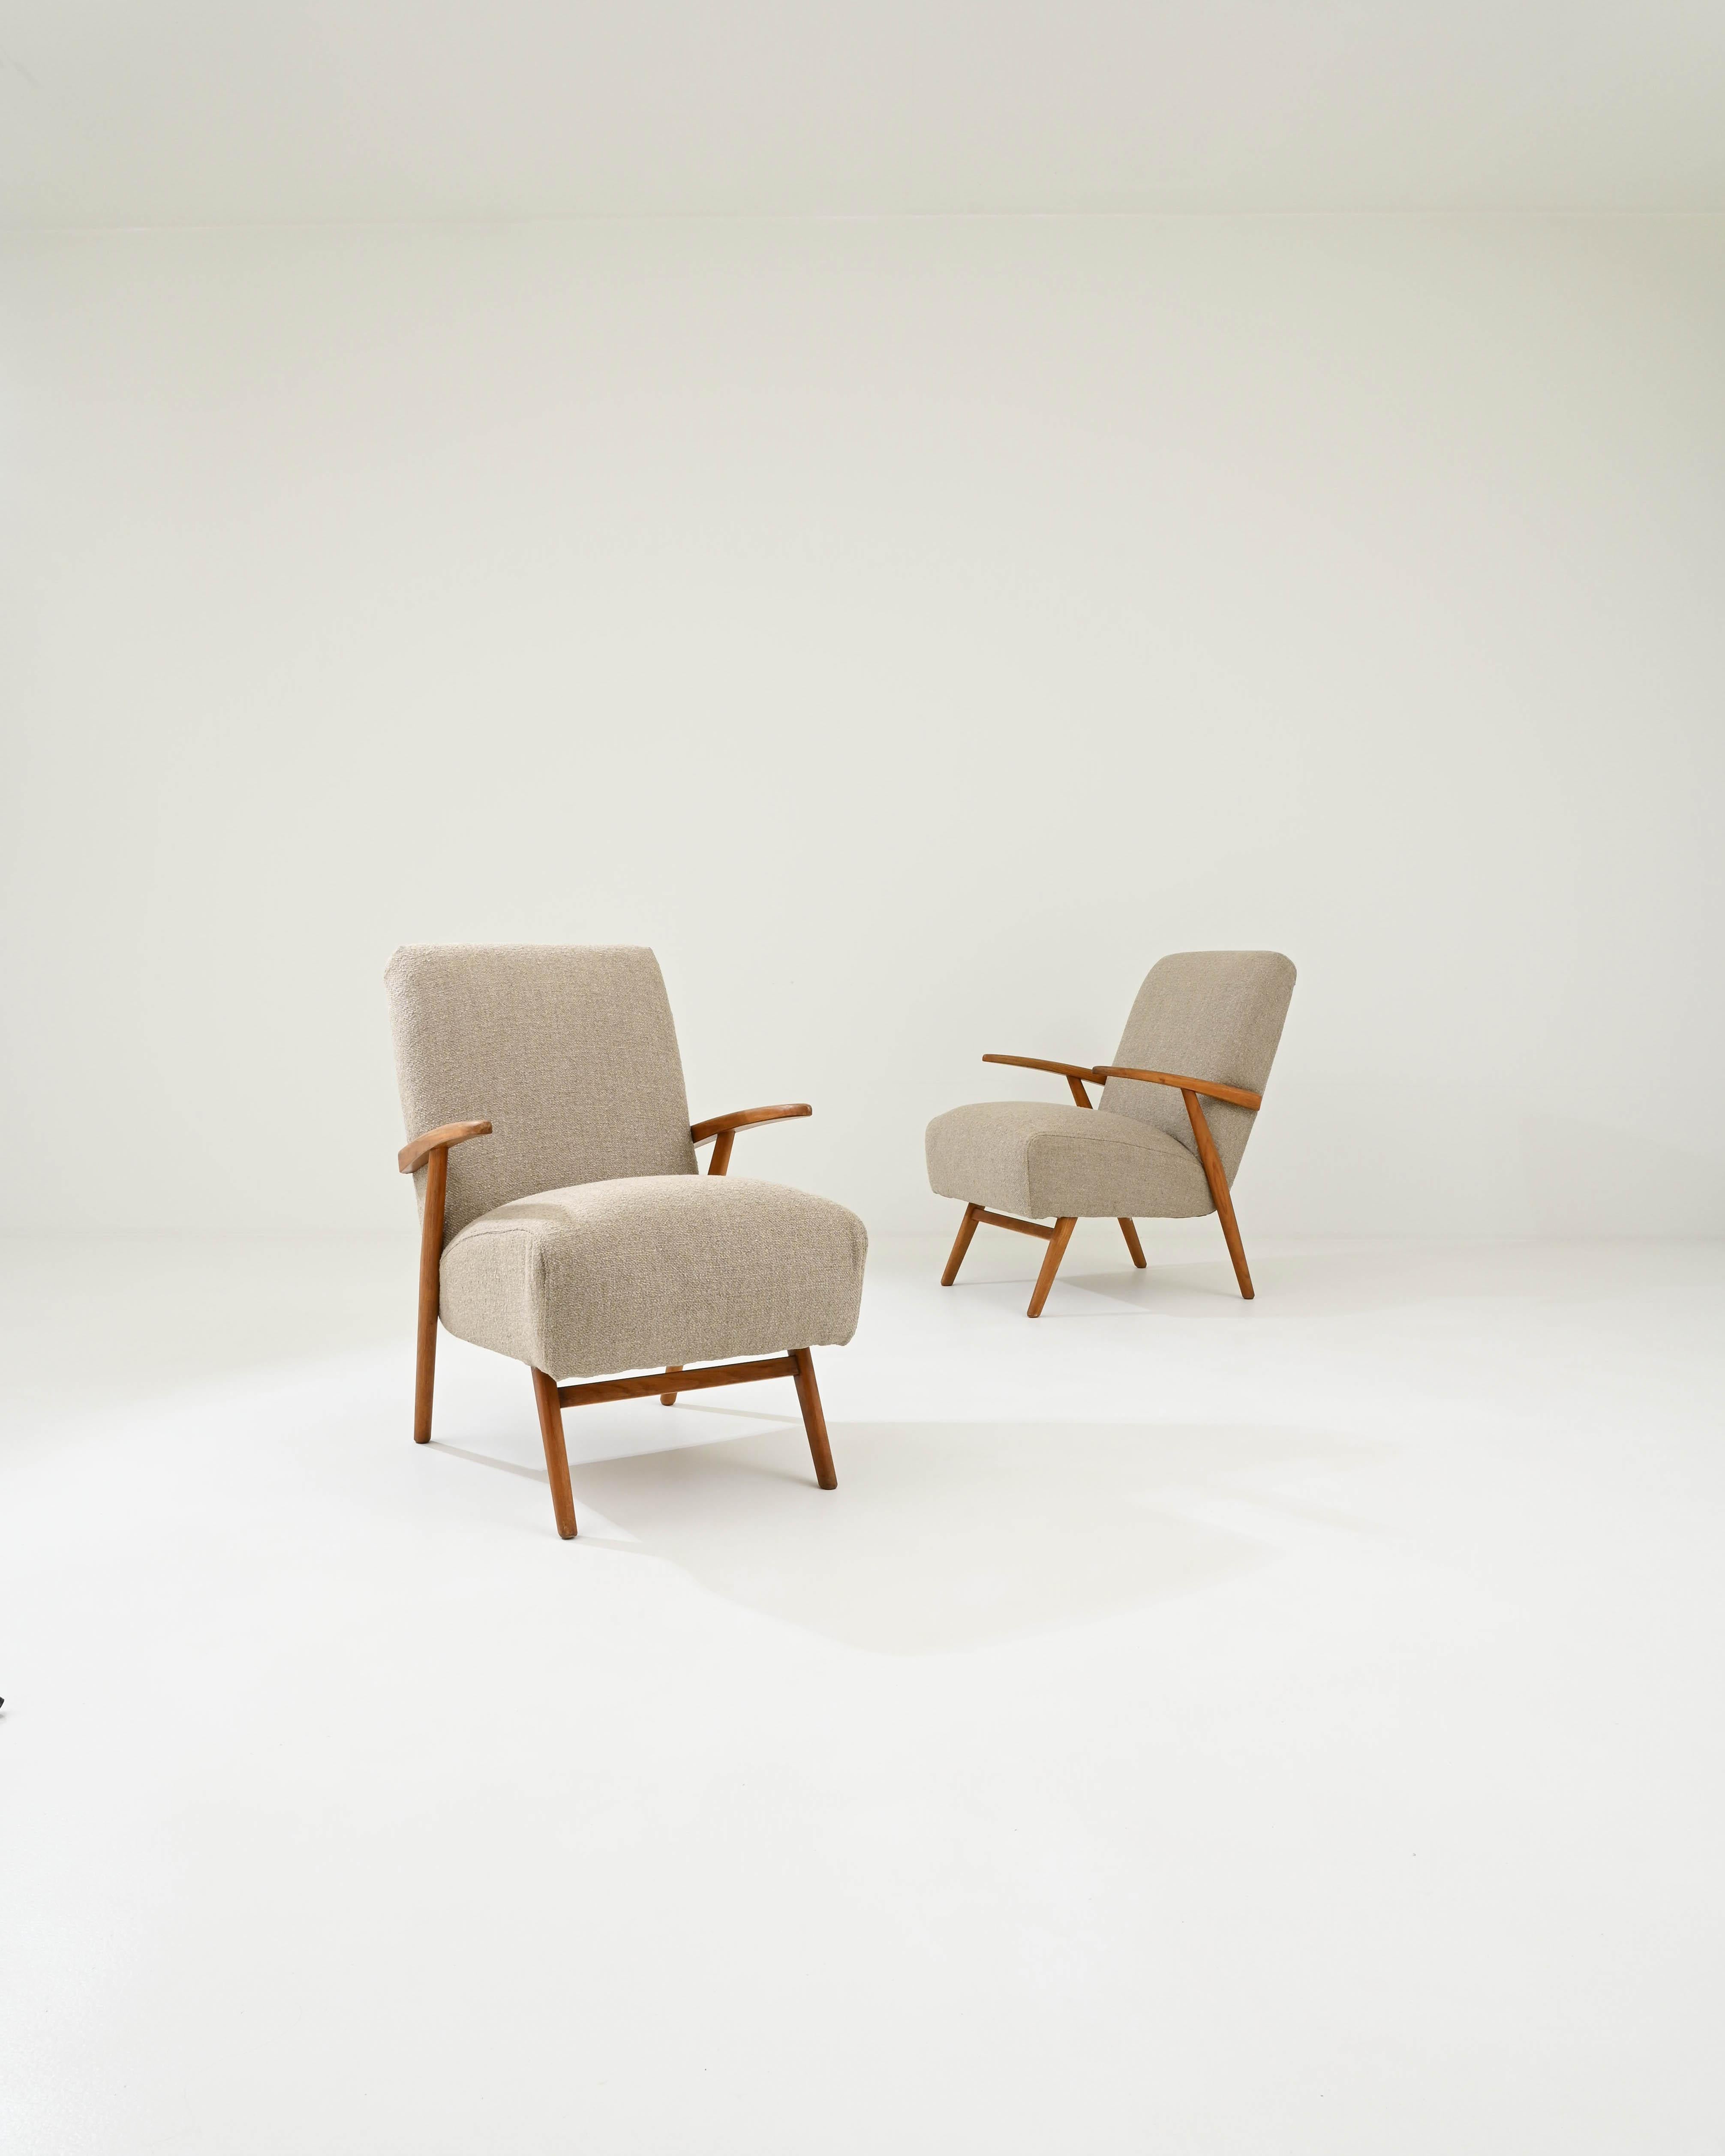 Designed in Czechia circa 1940, this pair of mid-century modern armchairs flaunts sculptural silhouettes, shaped by angular armrests and splayed legs, adding a dynamic and visually appealing flavor to the pieces. The warm tawny hue of the wood